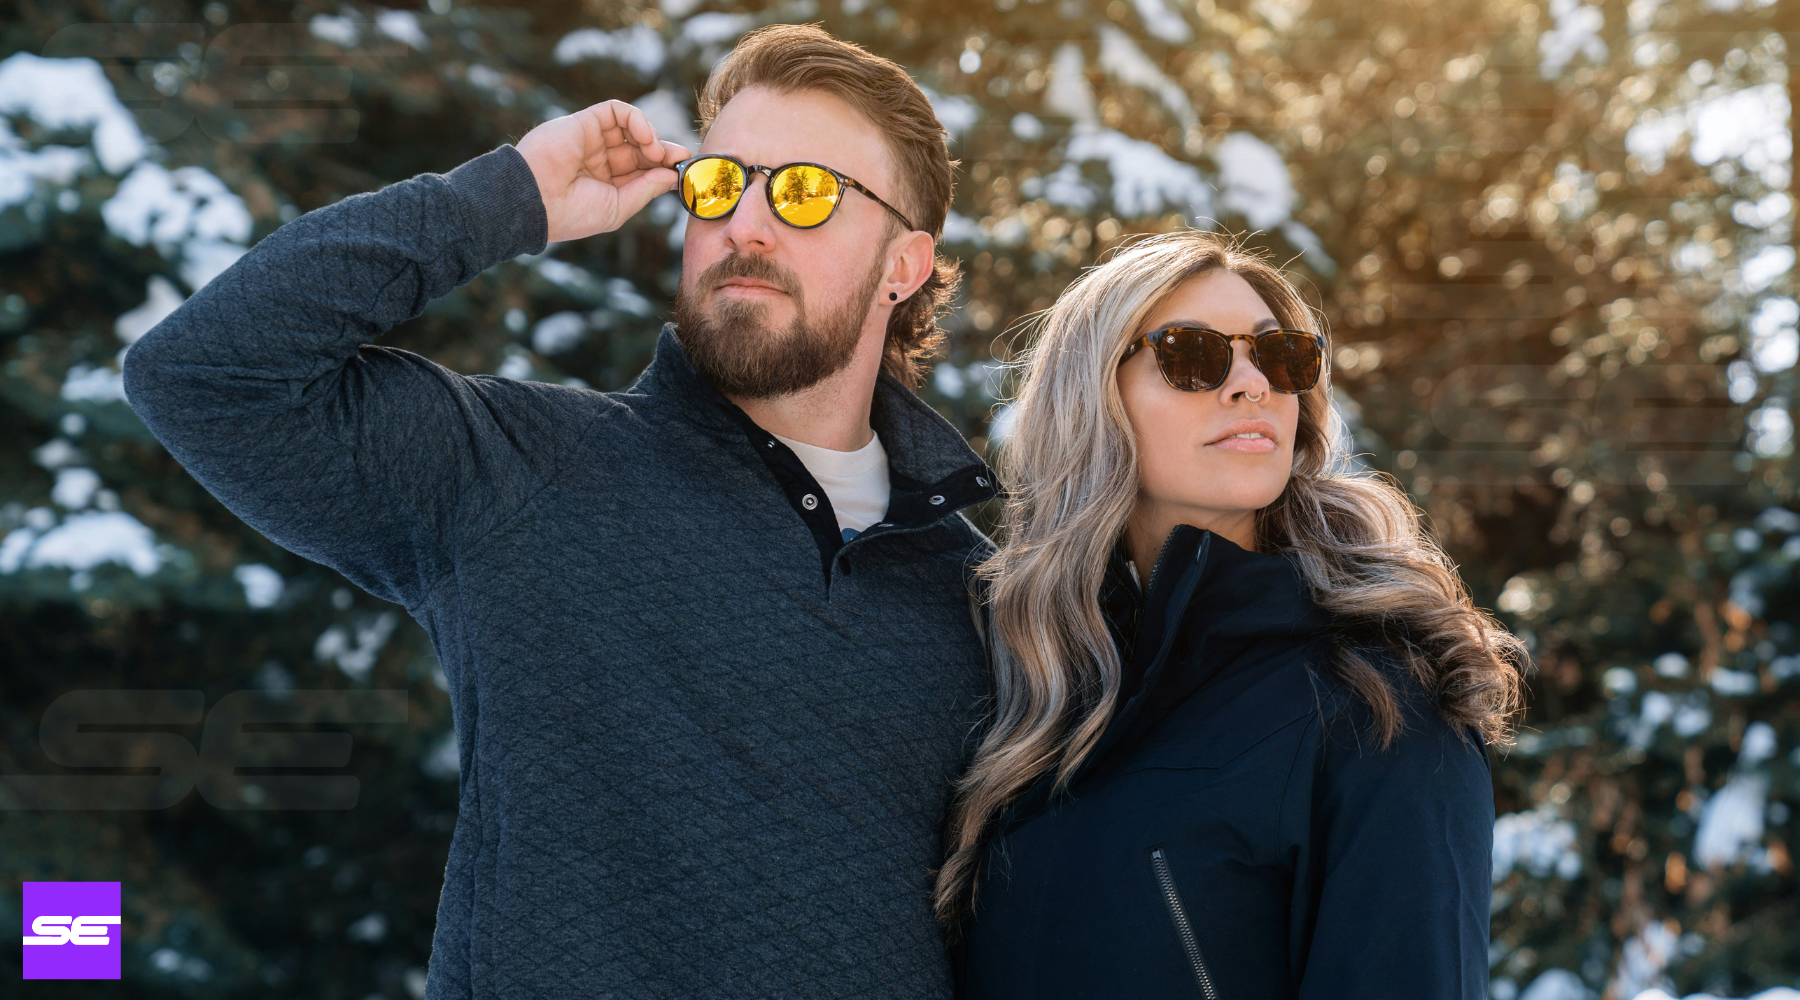 Sunglasses for Outdoor Sports: What to Look For